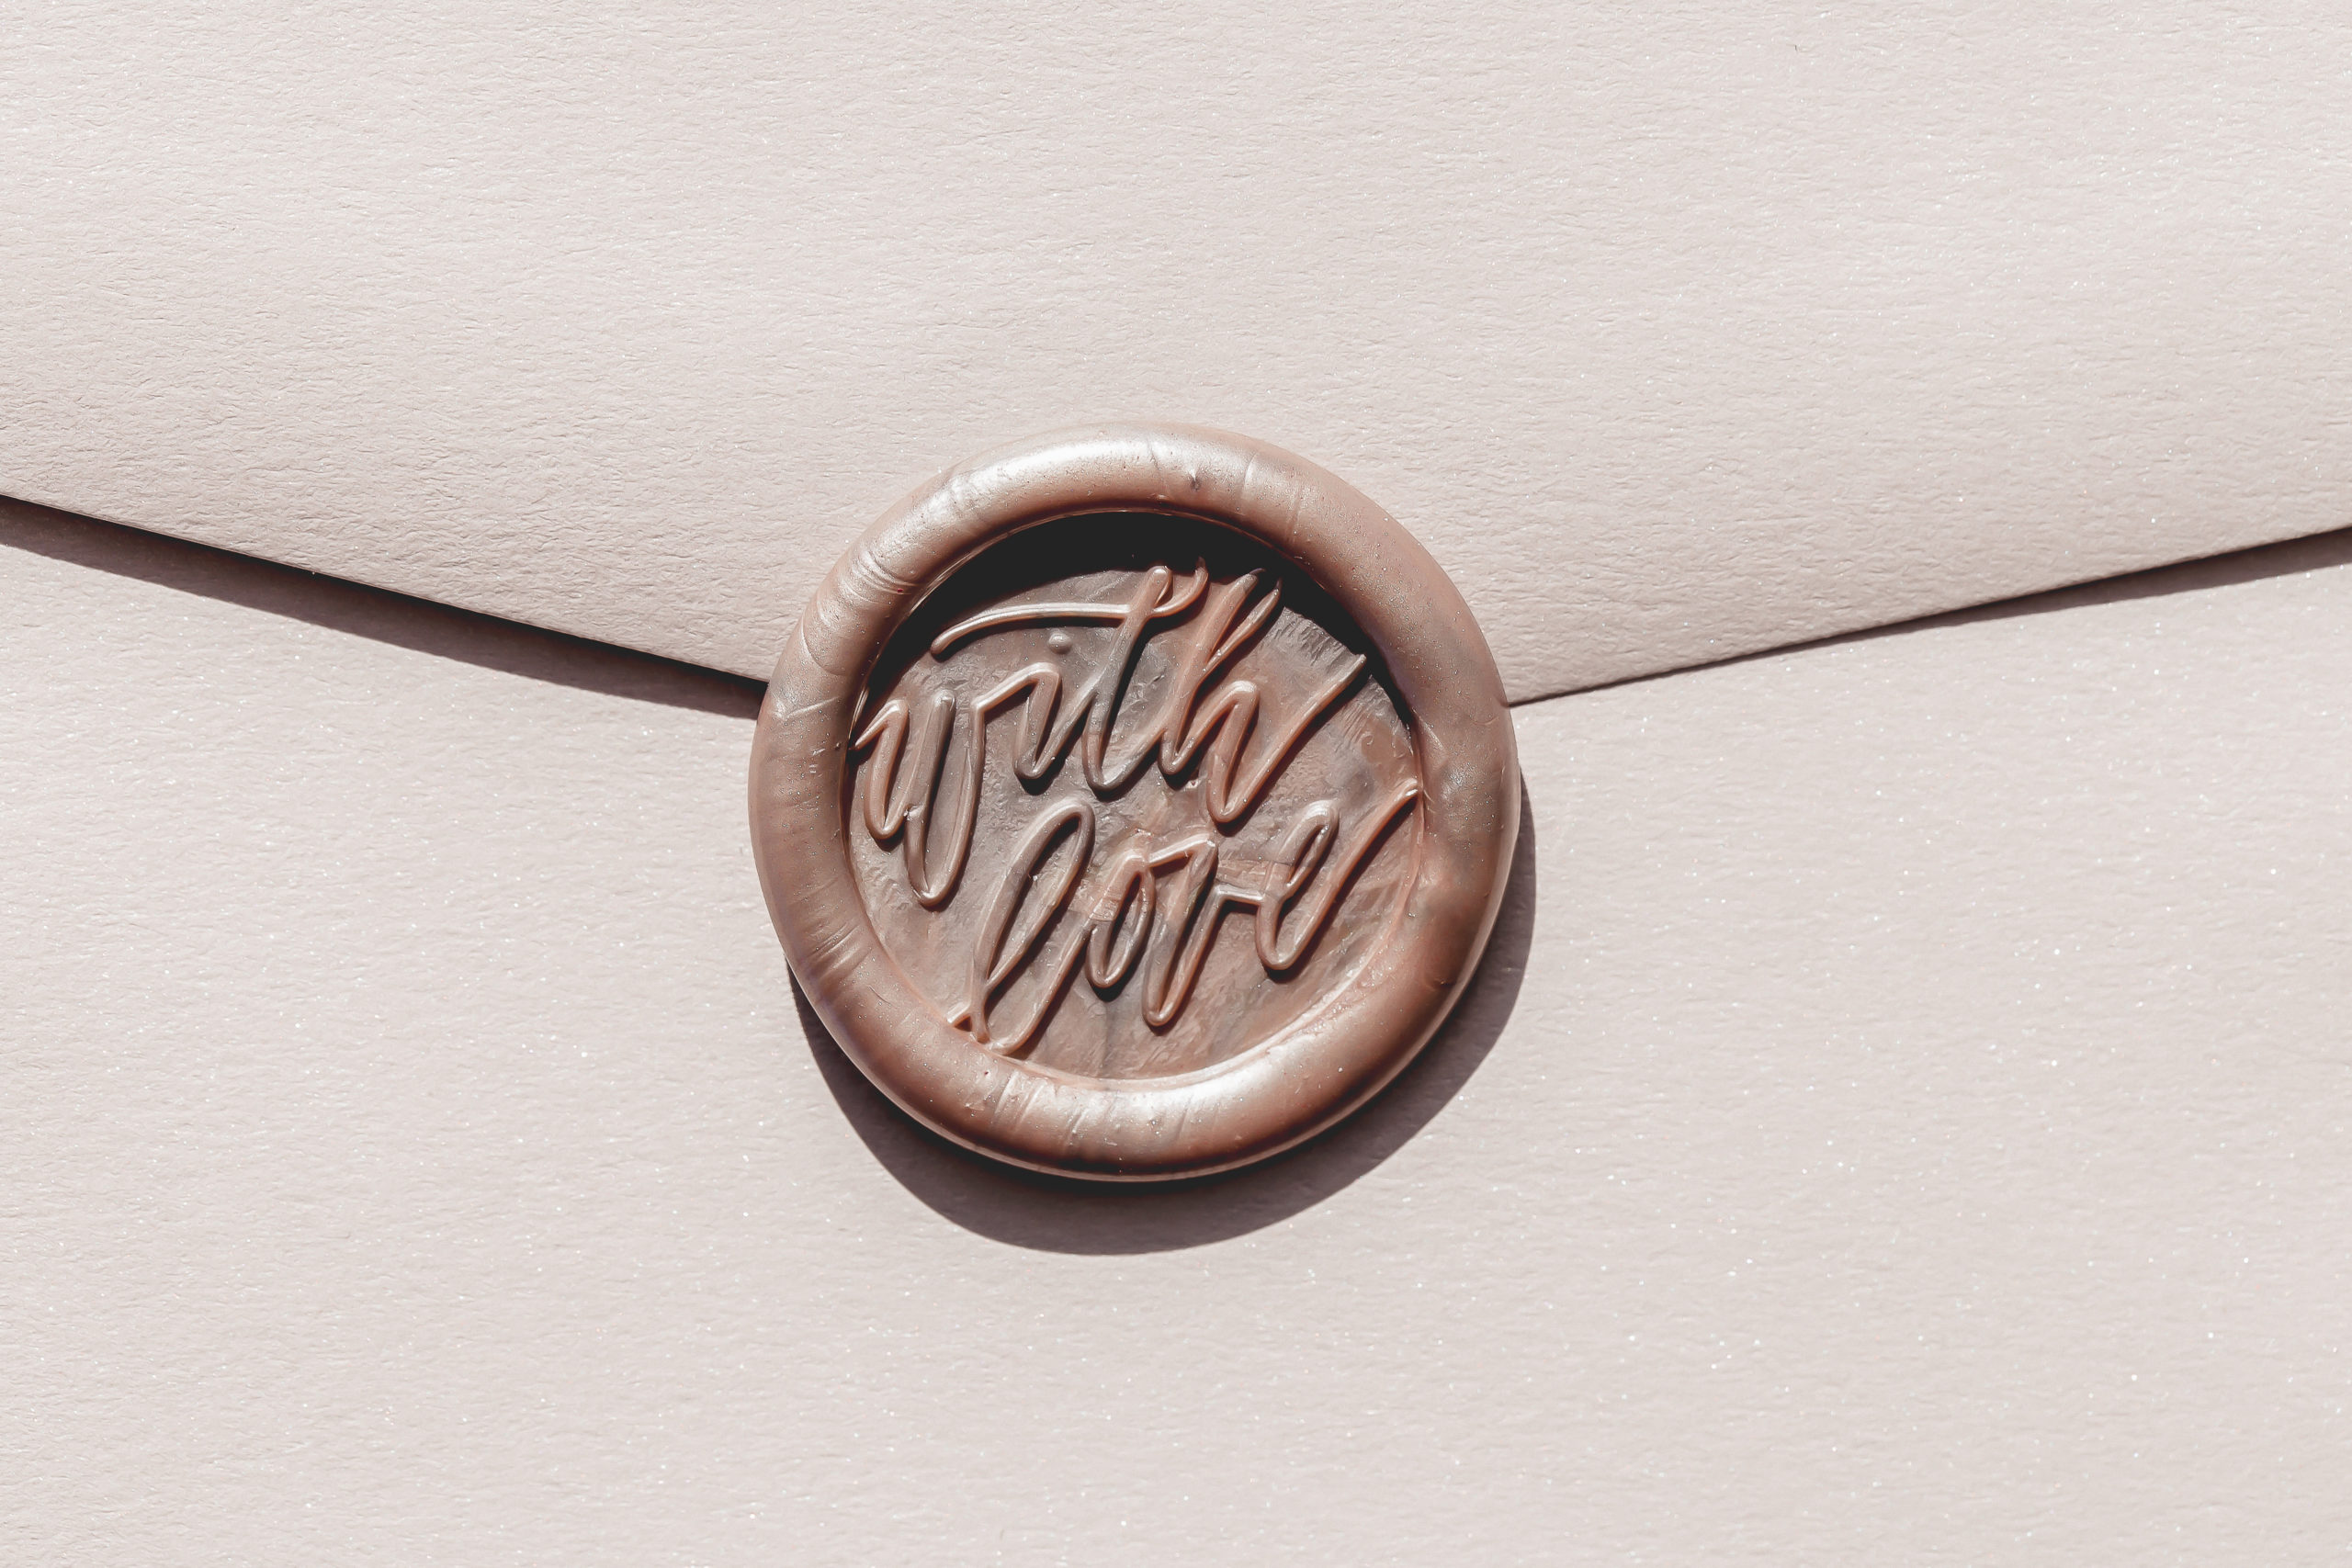 envelope with wax seal that says "with love"